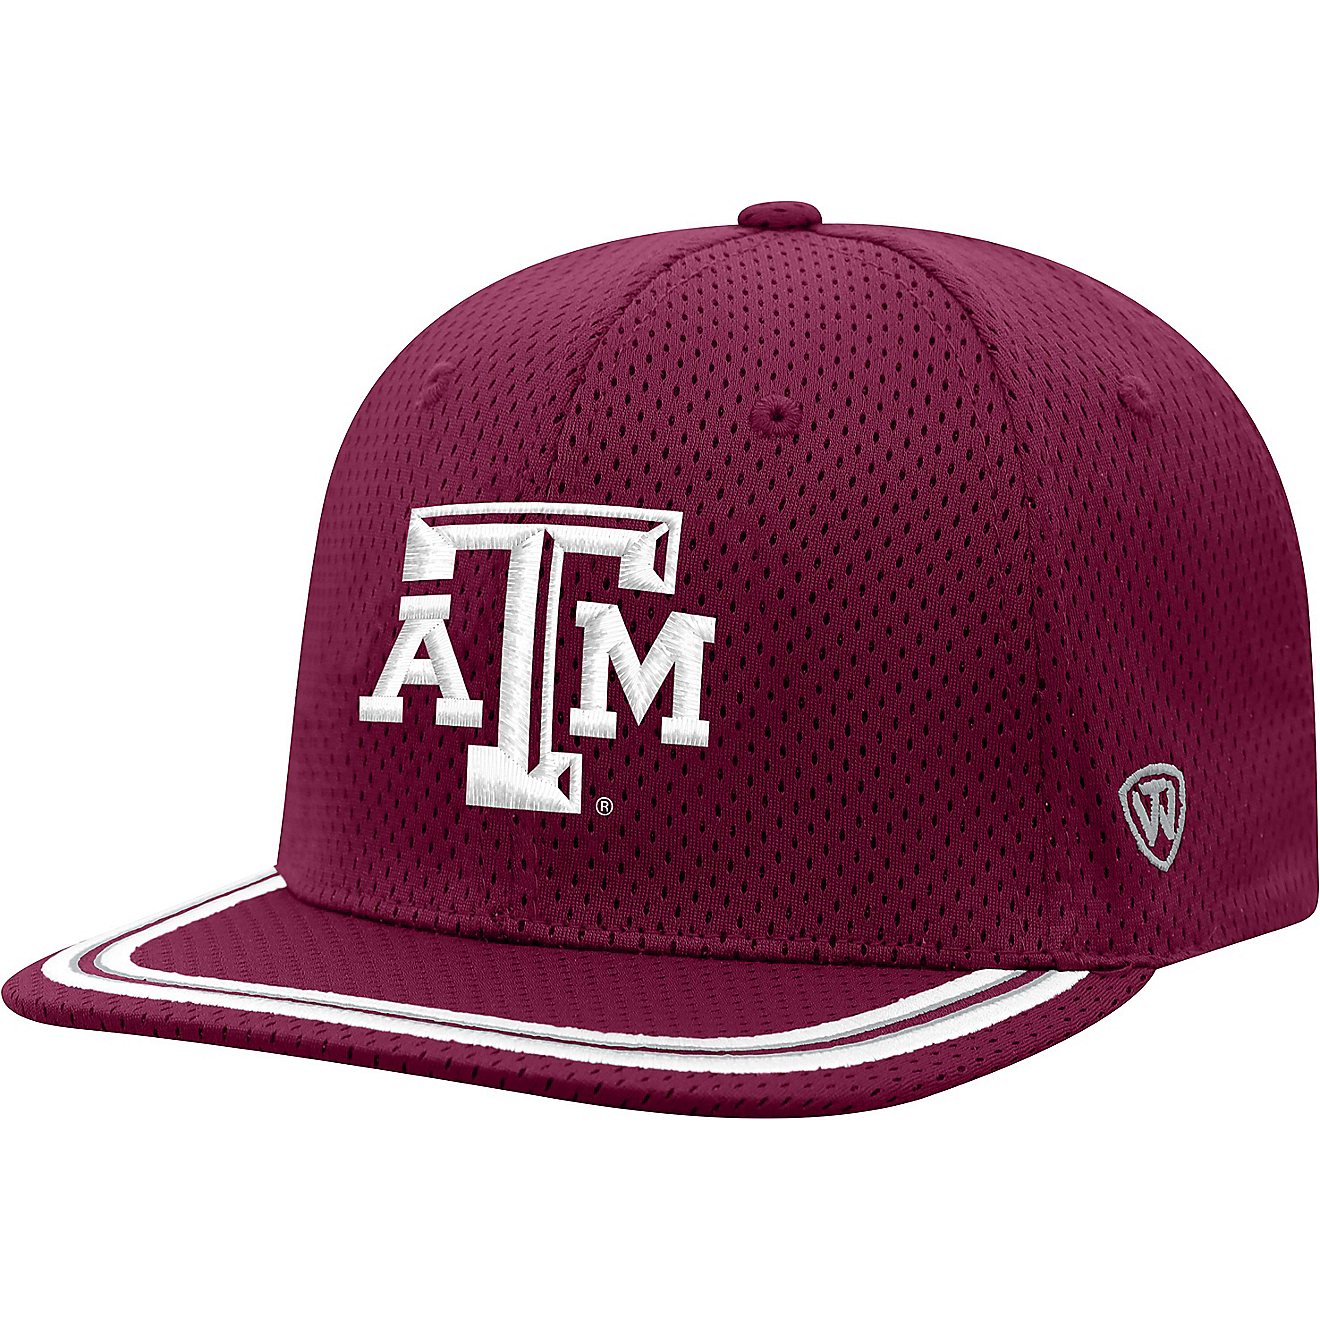 Top of the World Kids' Texas A&M University Spiker Adjustable Cap                                                                - view number 1